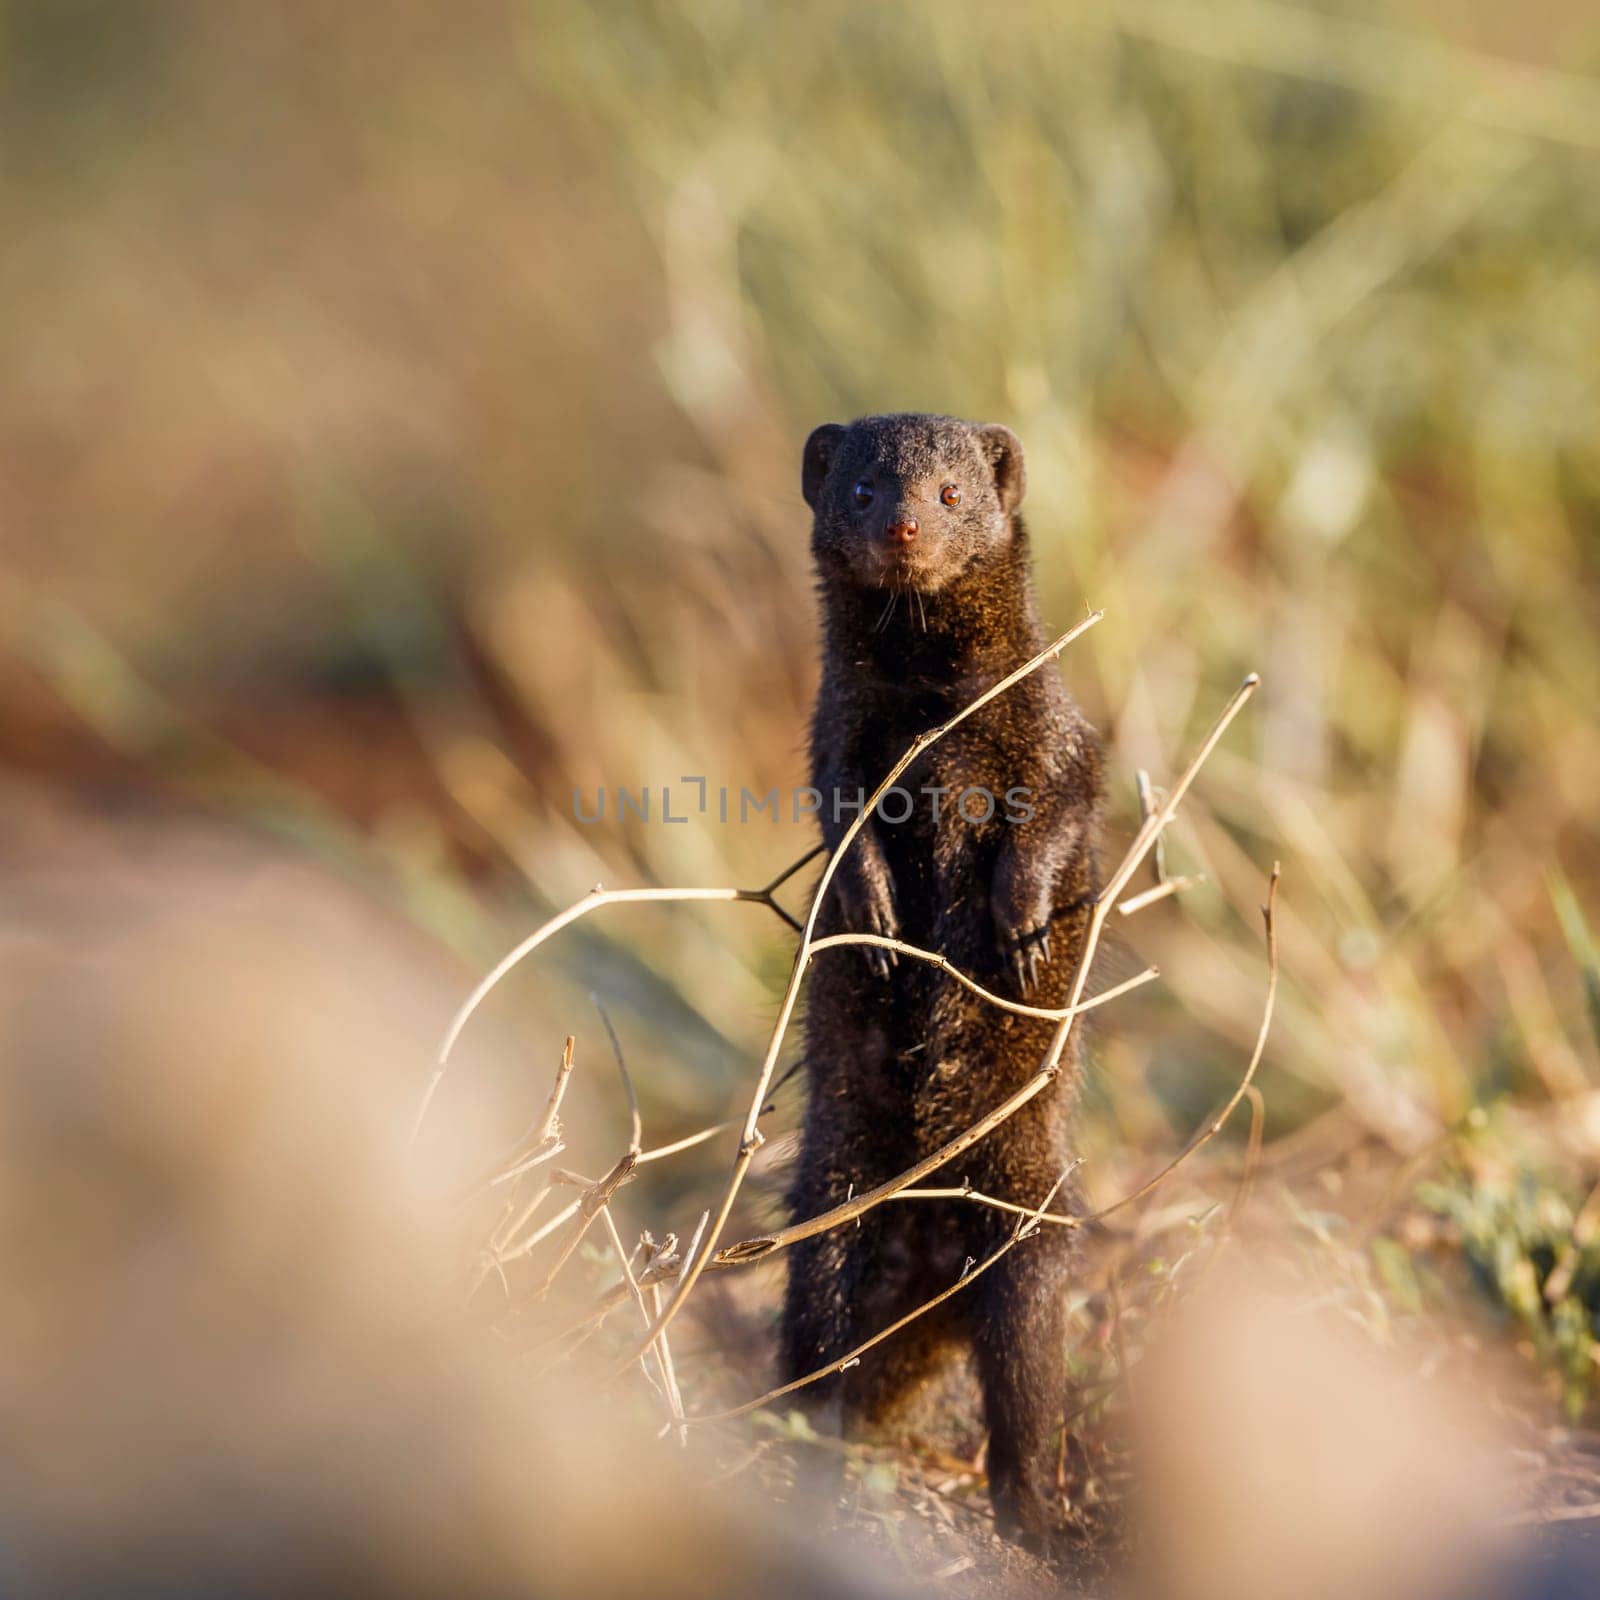 Dwarf mongoose in Kruger national park, South Africa by PACOCOMO